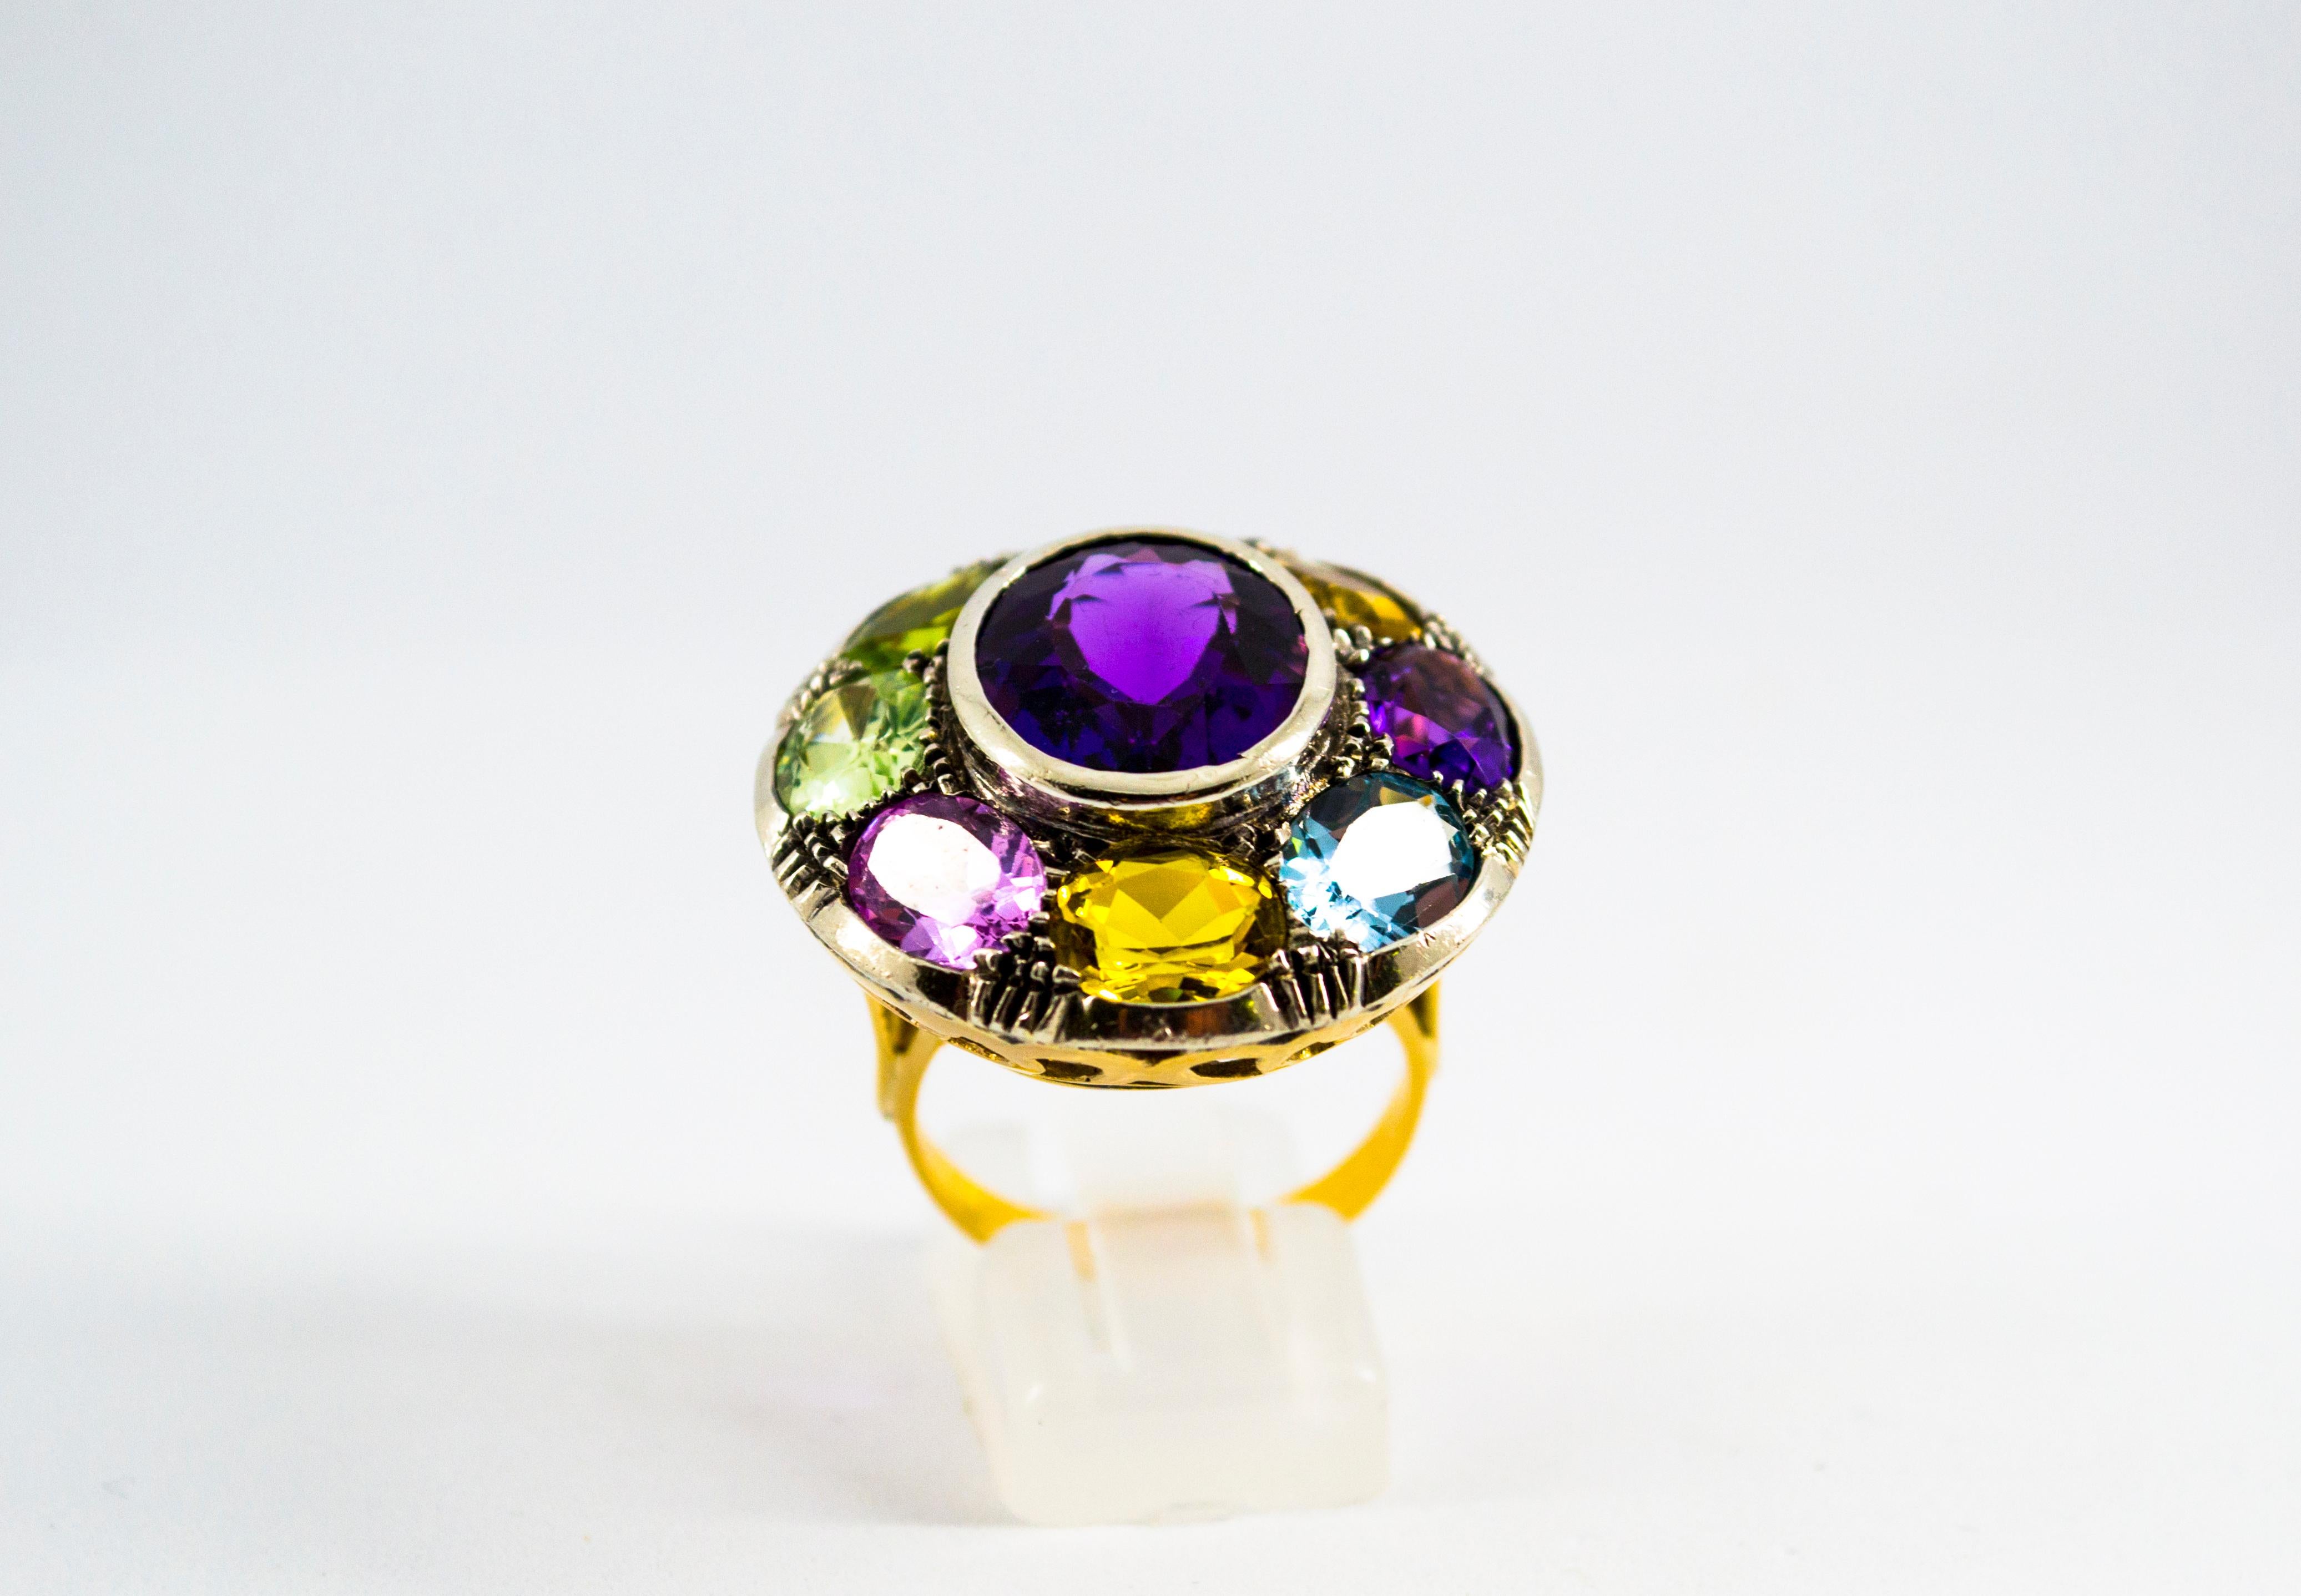 This Ring is made of 9K Yellow Gold and Sterling Silver.
This Ring has Amethyst, Peridot, Citrine, Lemon Quartz, Blue Topaz.
This Ring is inspired by Art Deco.

Size ITA: 18 USA: 8 1/4

We're a workshop so every piece is handmade, customizable and